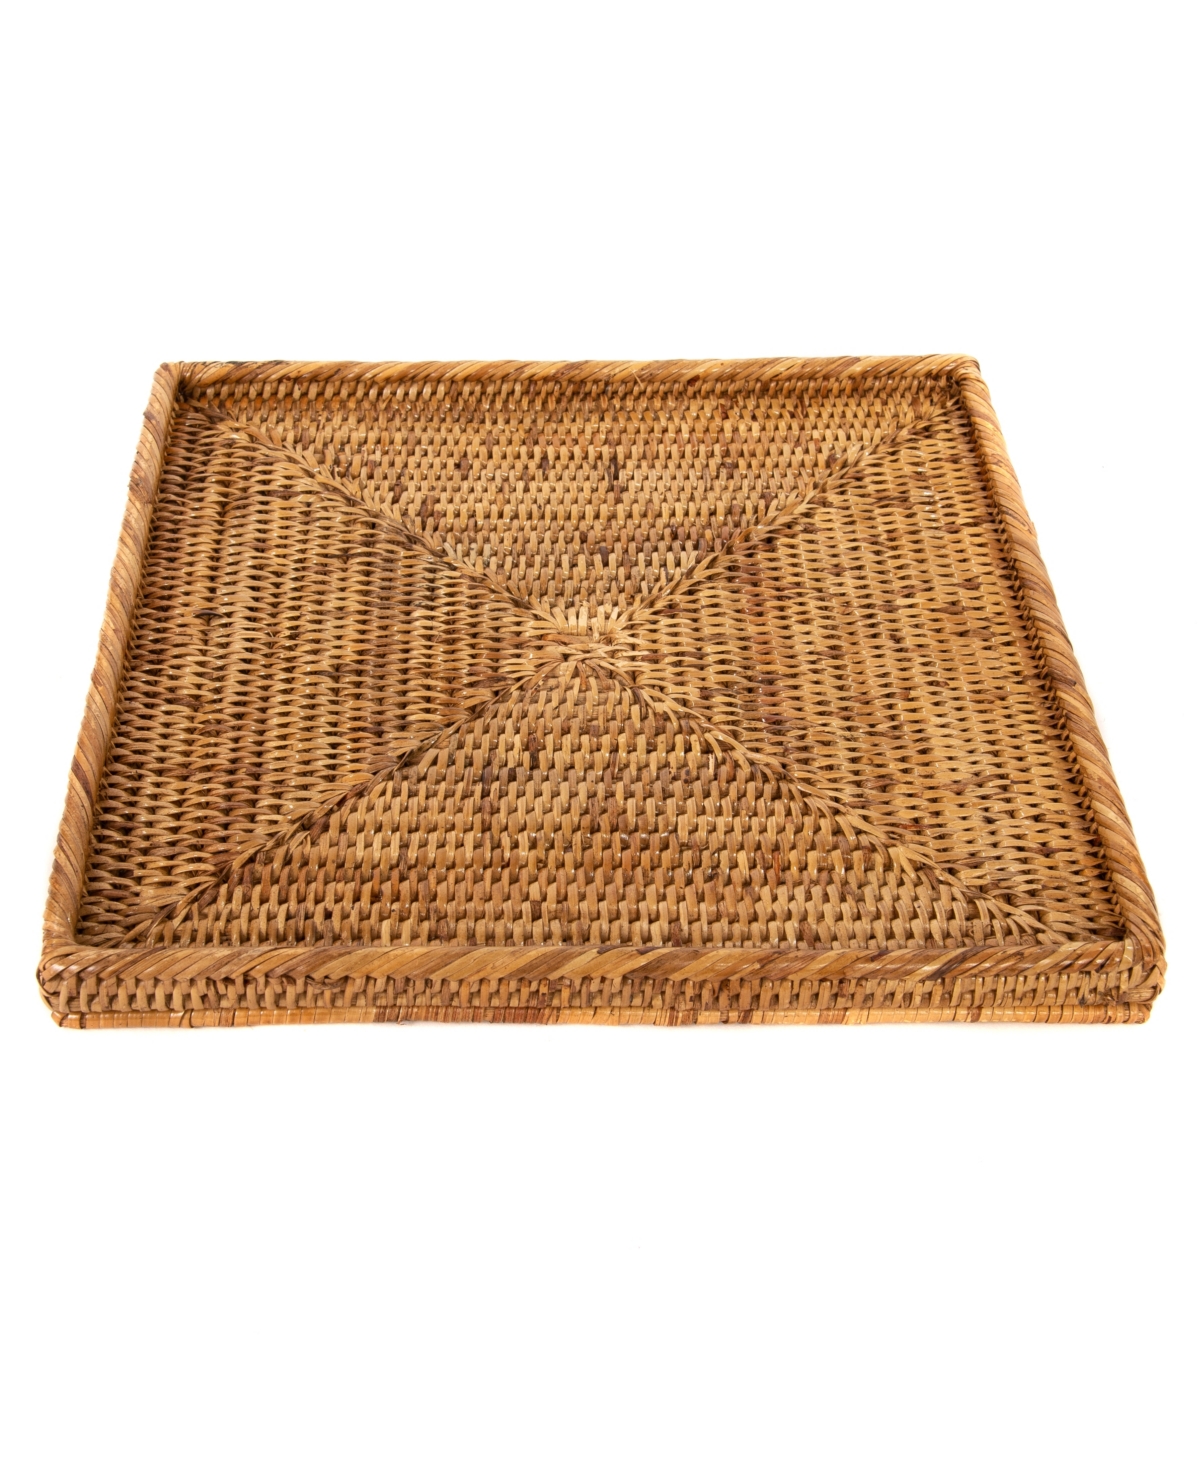 Artifacts Trading Company Artifacts Rattan Square Flat Tray In Honey Brown